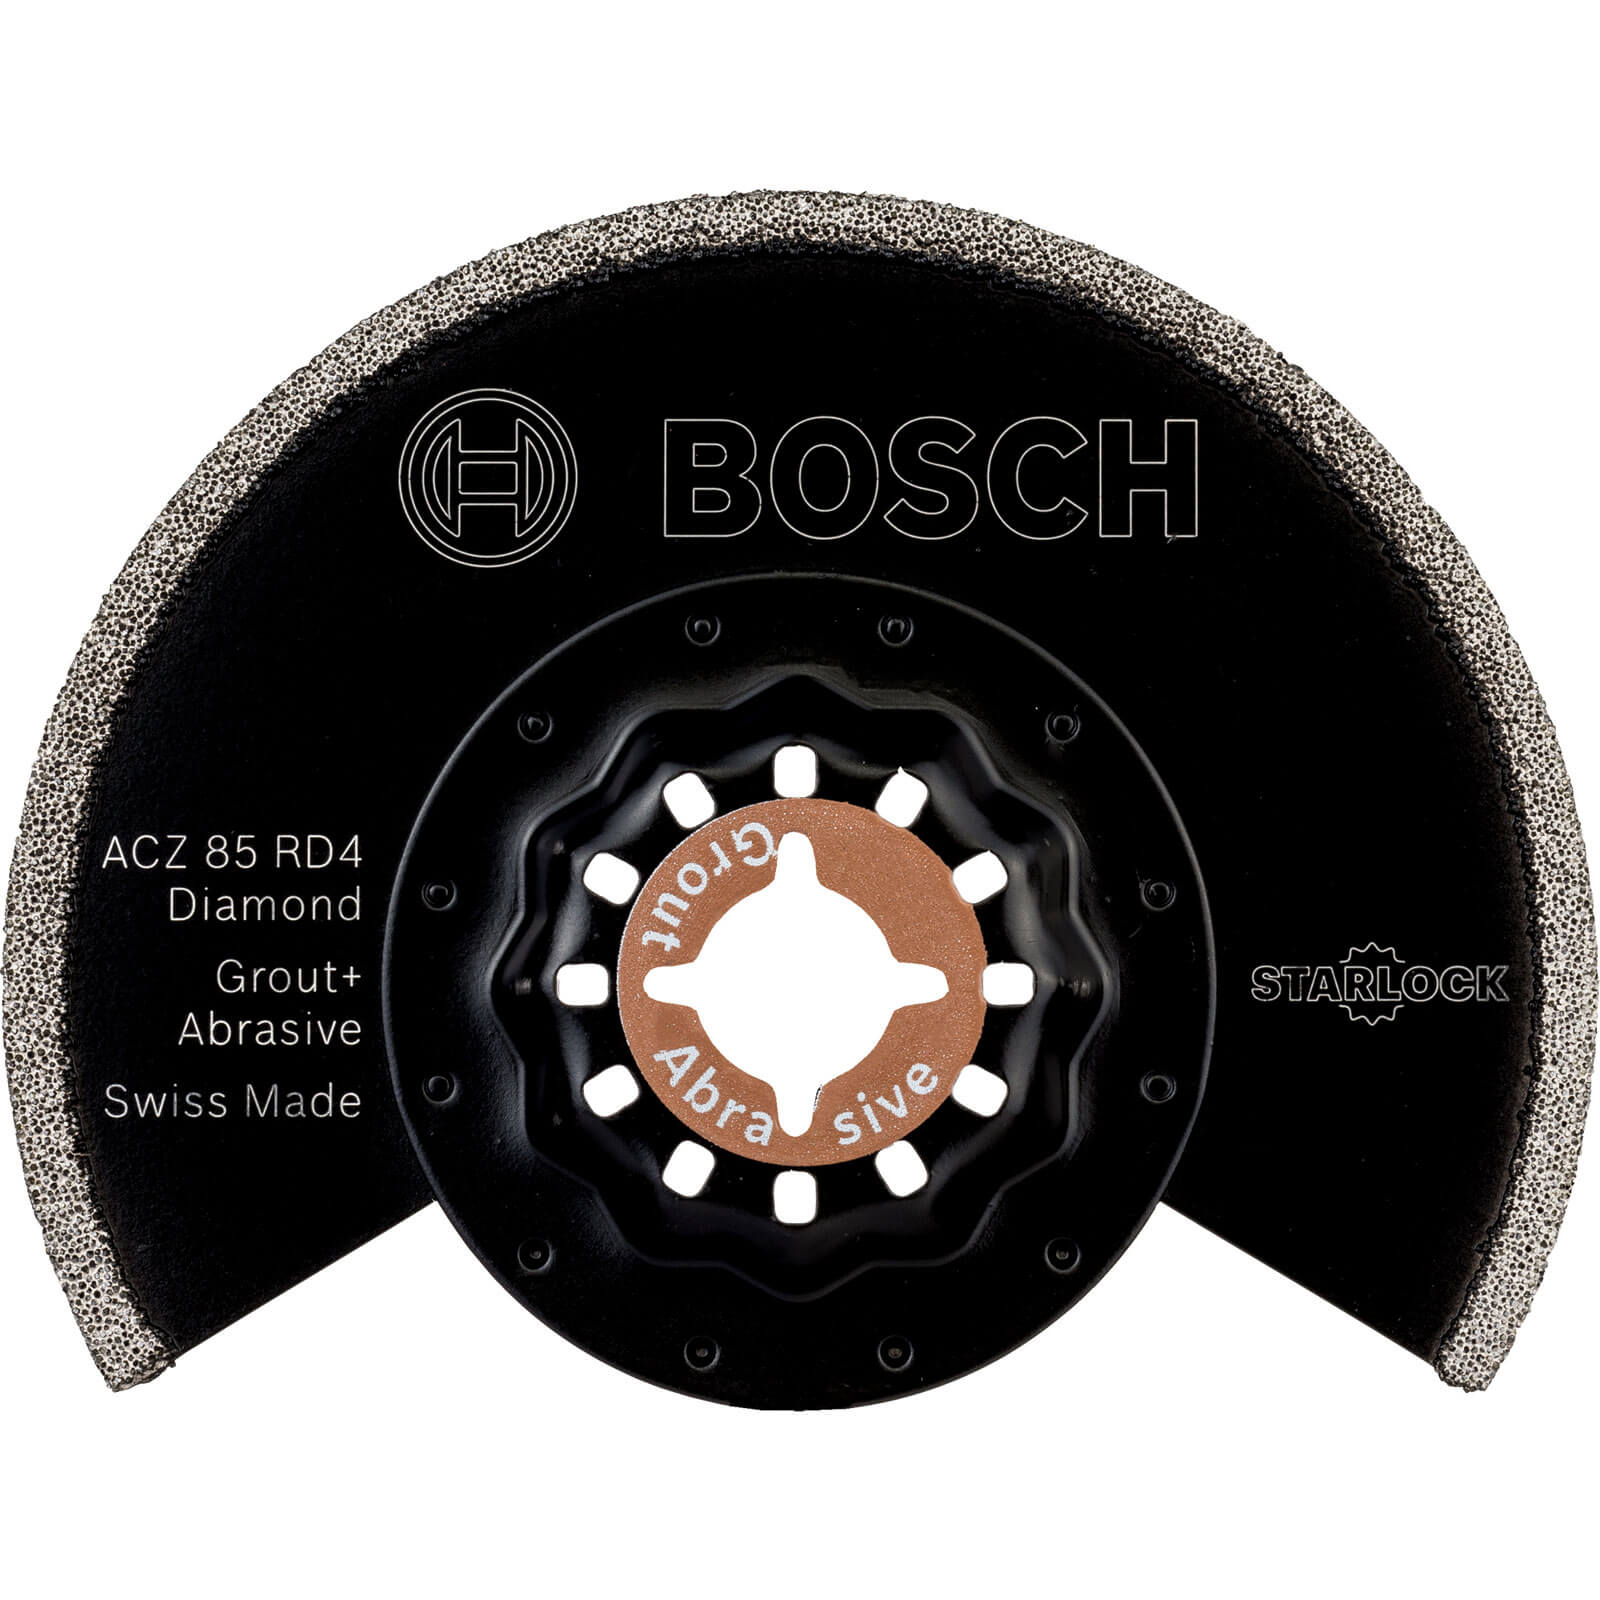 Photo of Bosch Acz 85 Rd4 Grout Oscillating Multi Tool Segment Saw Blade 85mm Pack Of 1